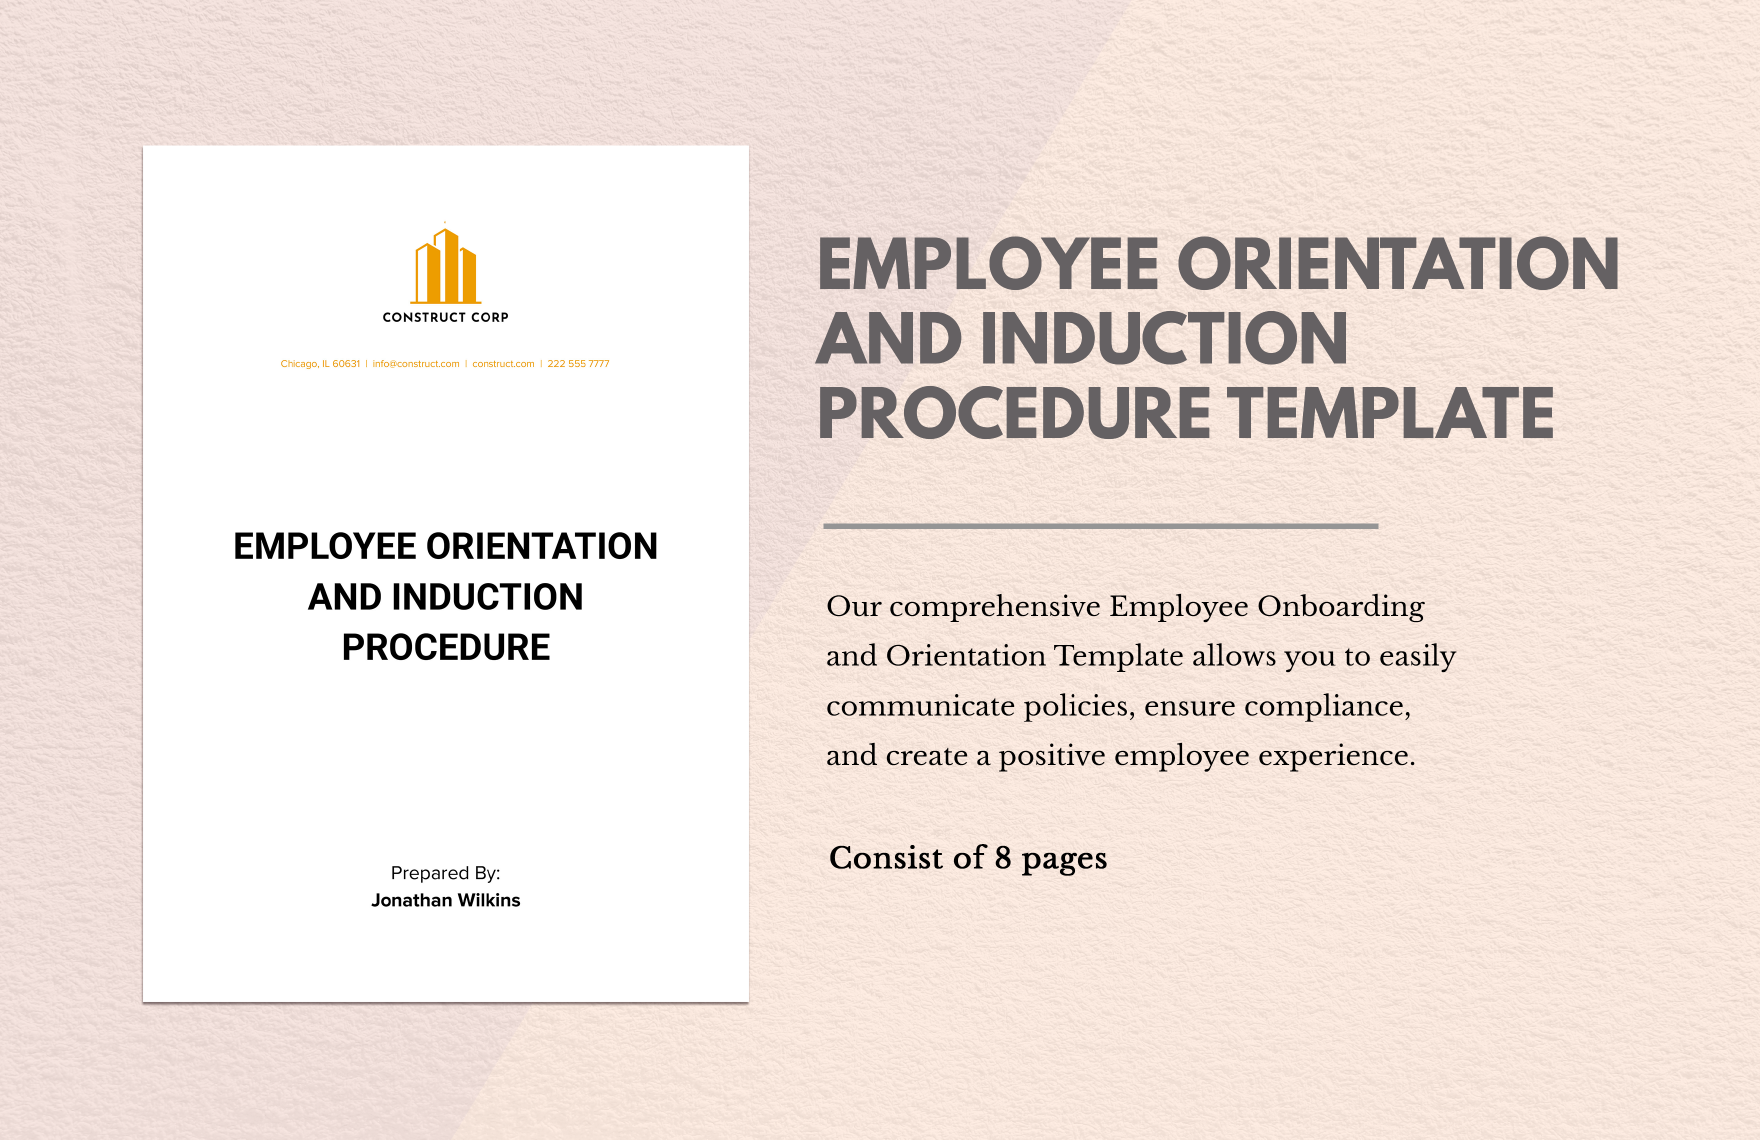 Free Employee Orientation and Induction Procedure in Word, Google Docs